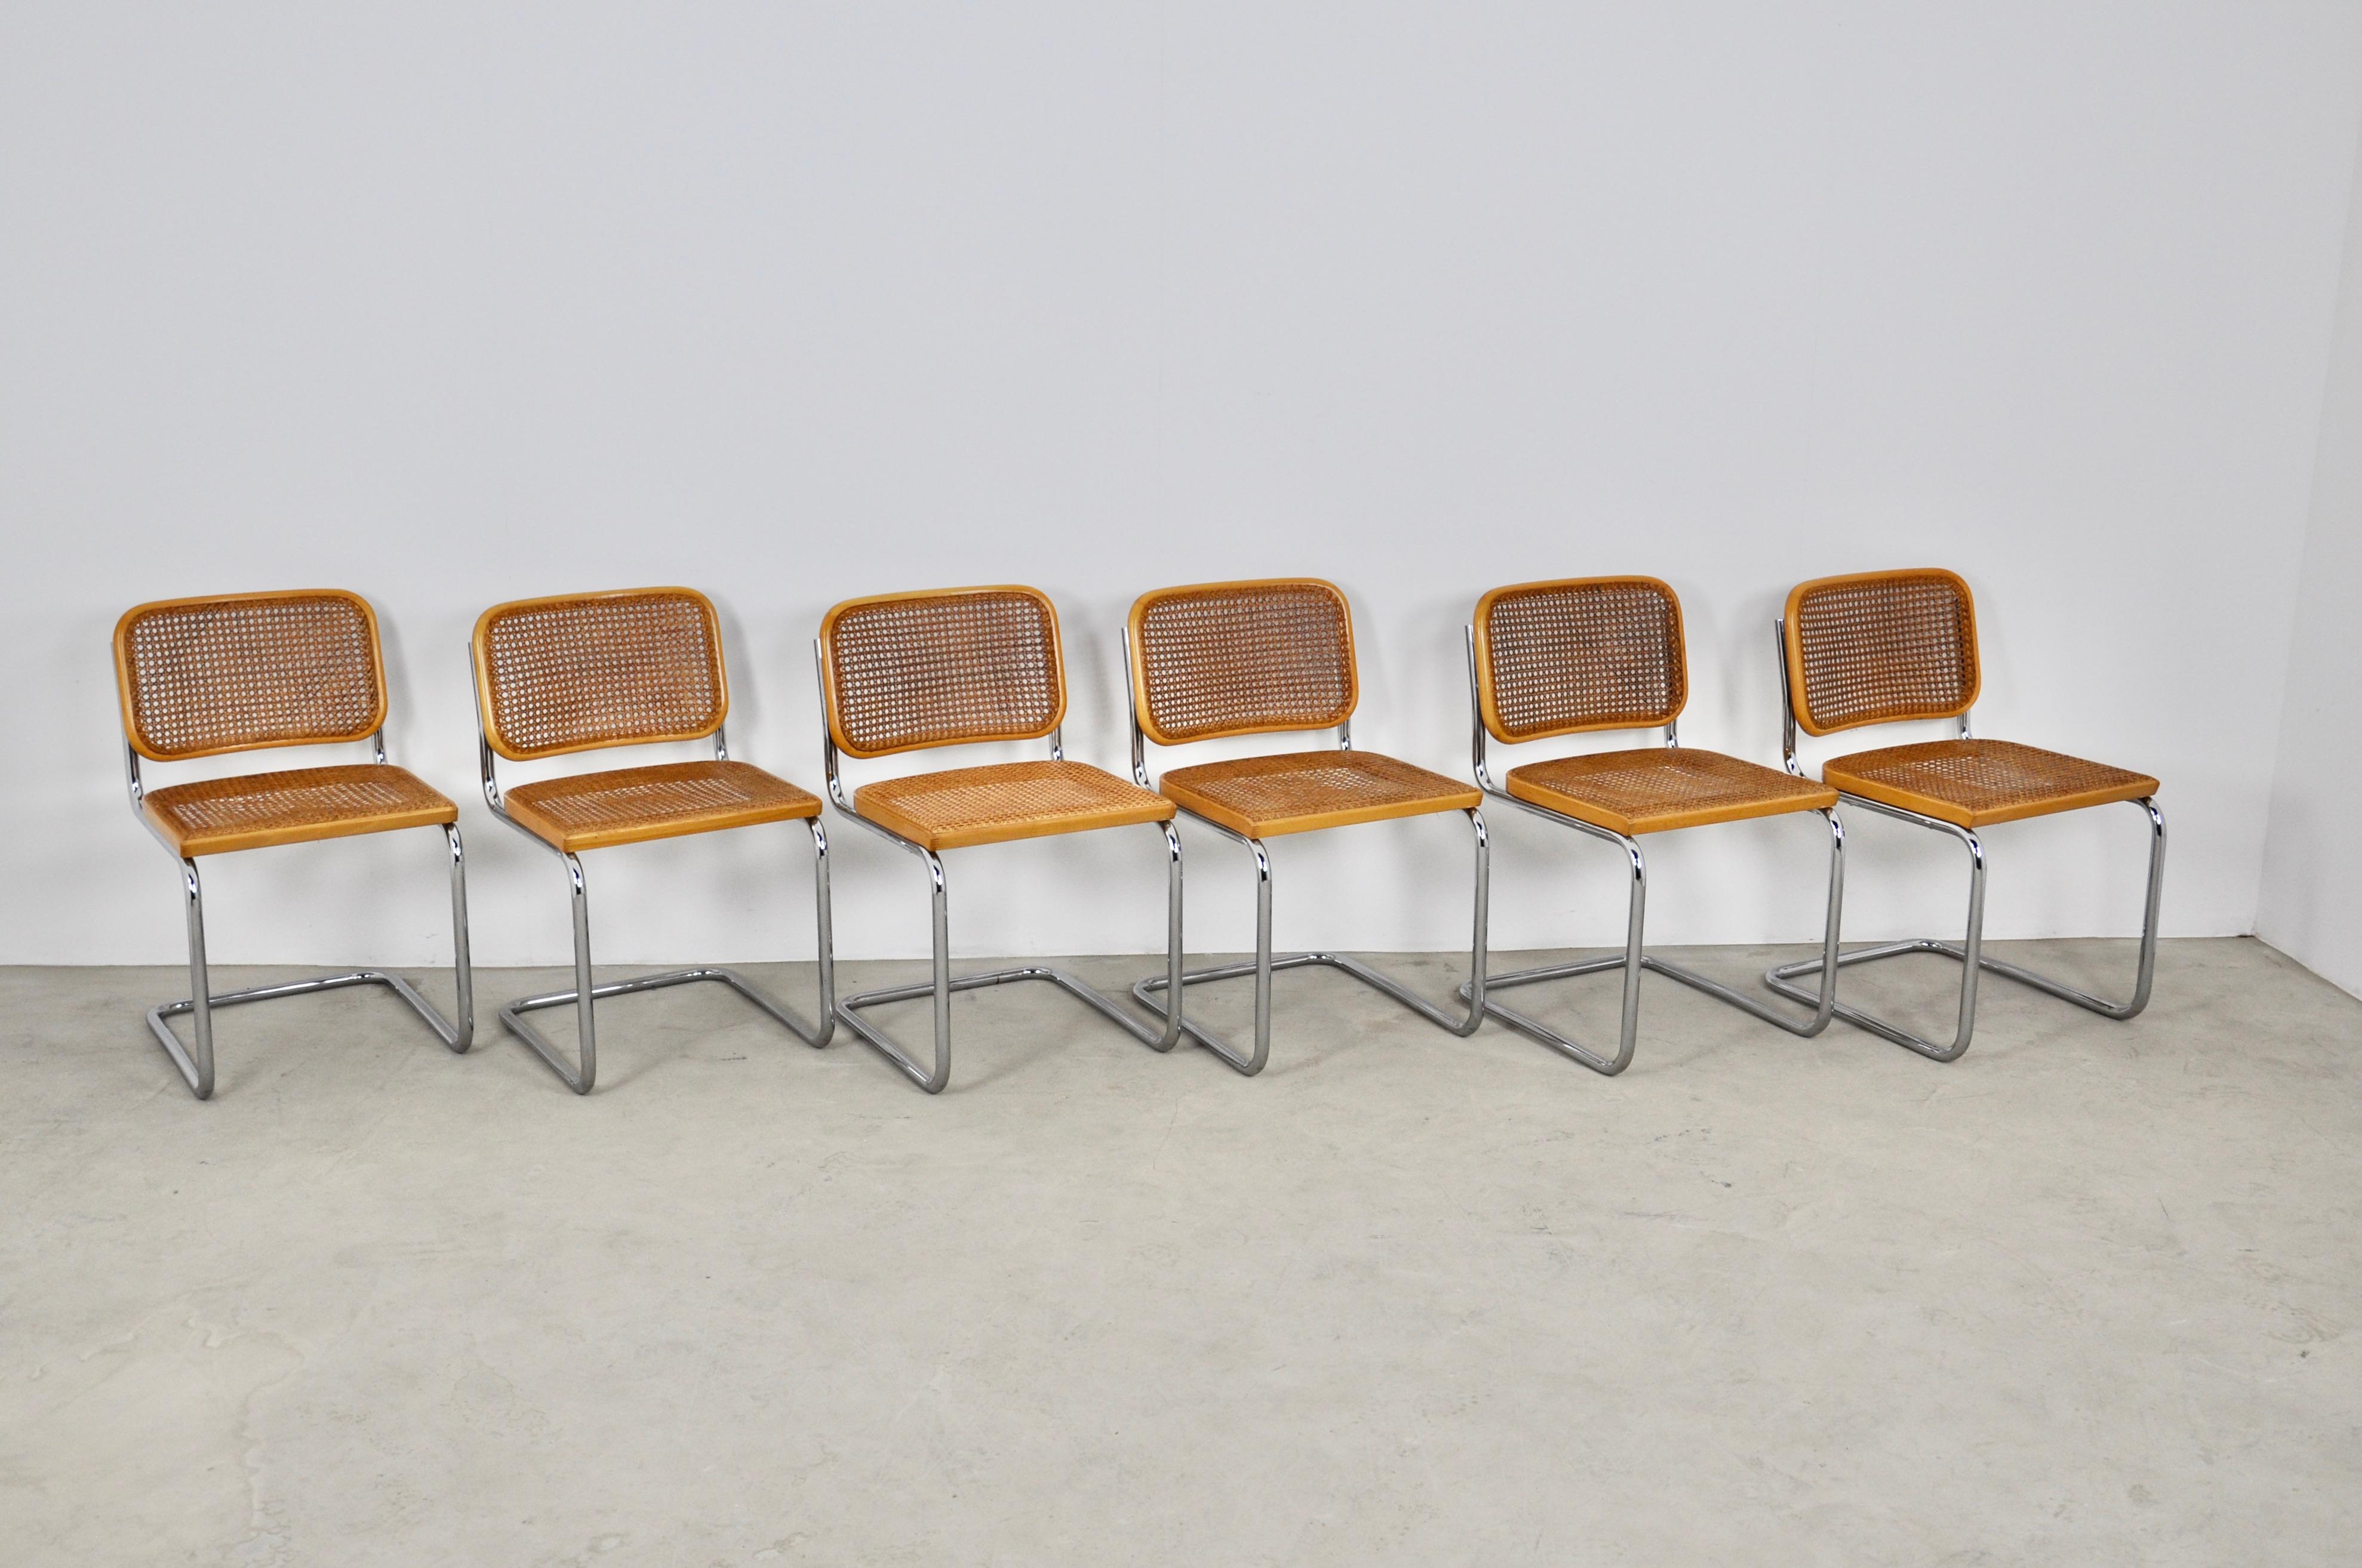 Series of 6 chairs in chromed metal, wooden structure in wood color and wickerwork. wear due to the time and the age of the chairs. Measures: Seat height 46cm. Stamped Gavina.